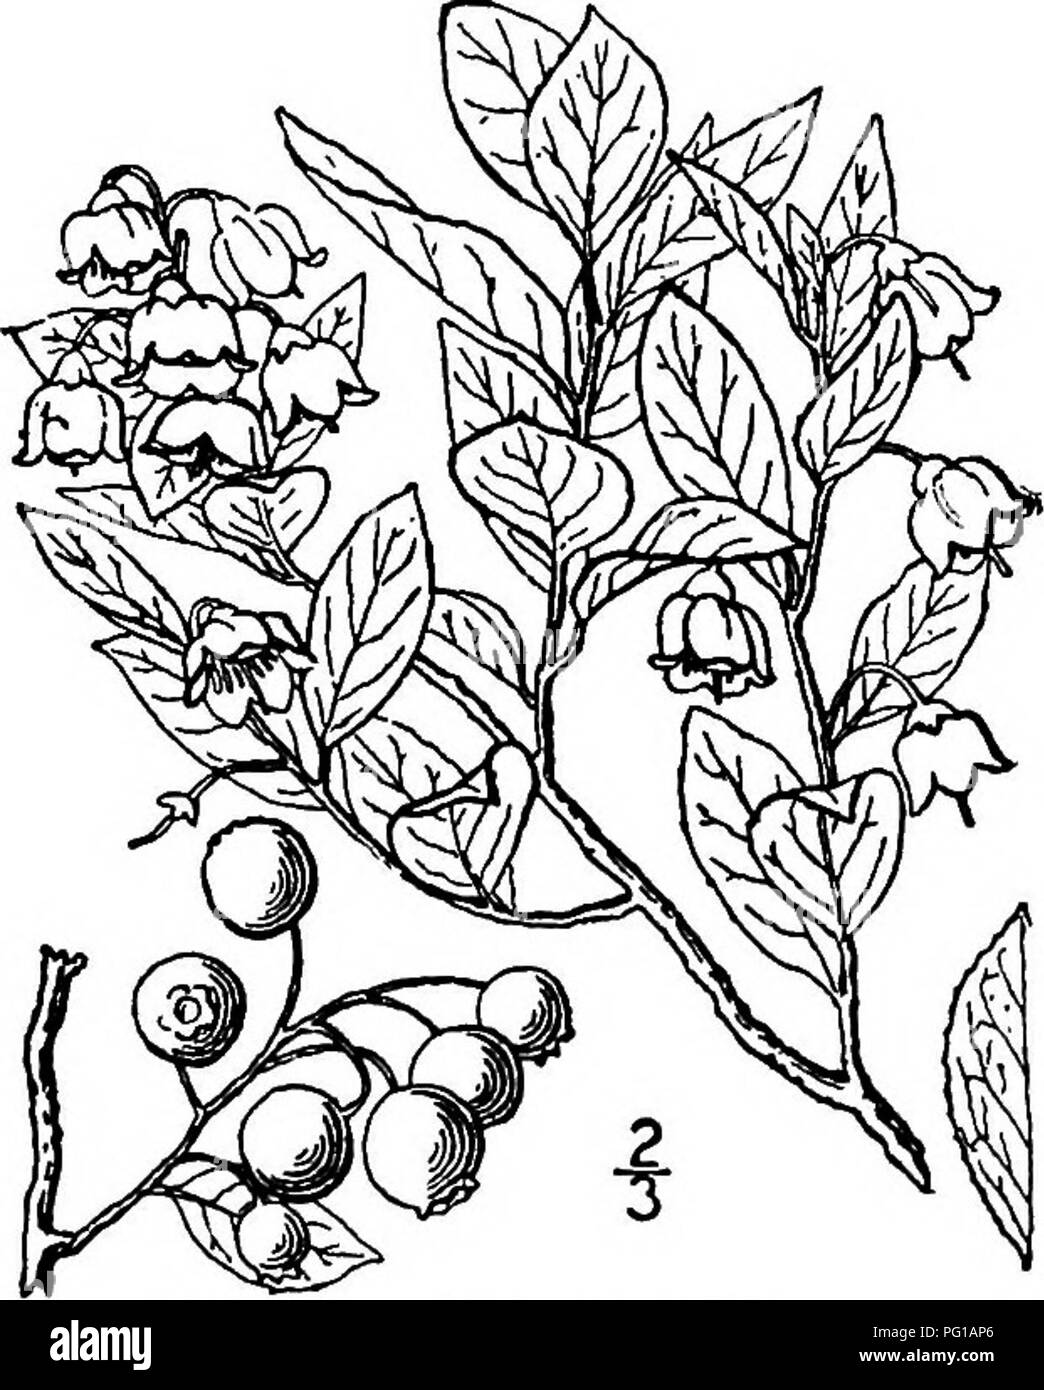 . North American trees : being descriptions and illustrations of the trees growing independently of cultivation in North America, north of Mexico and the West Indies . Trees. 766 Tree Huckleberry minutely tipped, more or less wedge-shaped at the base, slightly revolute and glandular on the margin; they are reddish and hairy when unfolding, becoming deep green and shining with some hairs along the venation above, paler, glaucous and smooth except along the principal veins beneath; the leaf-stalk is short and broad; in the southern part of its range the leaves persist until the new ones are full Stock Photo